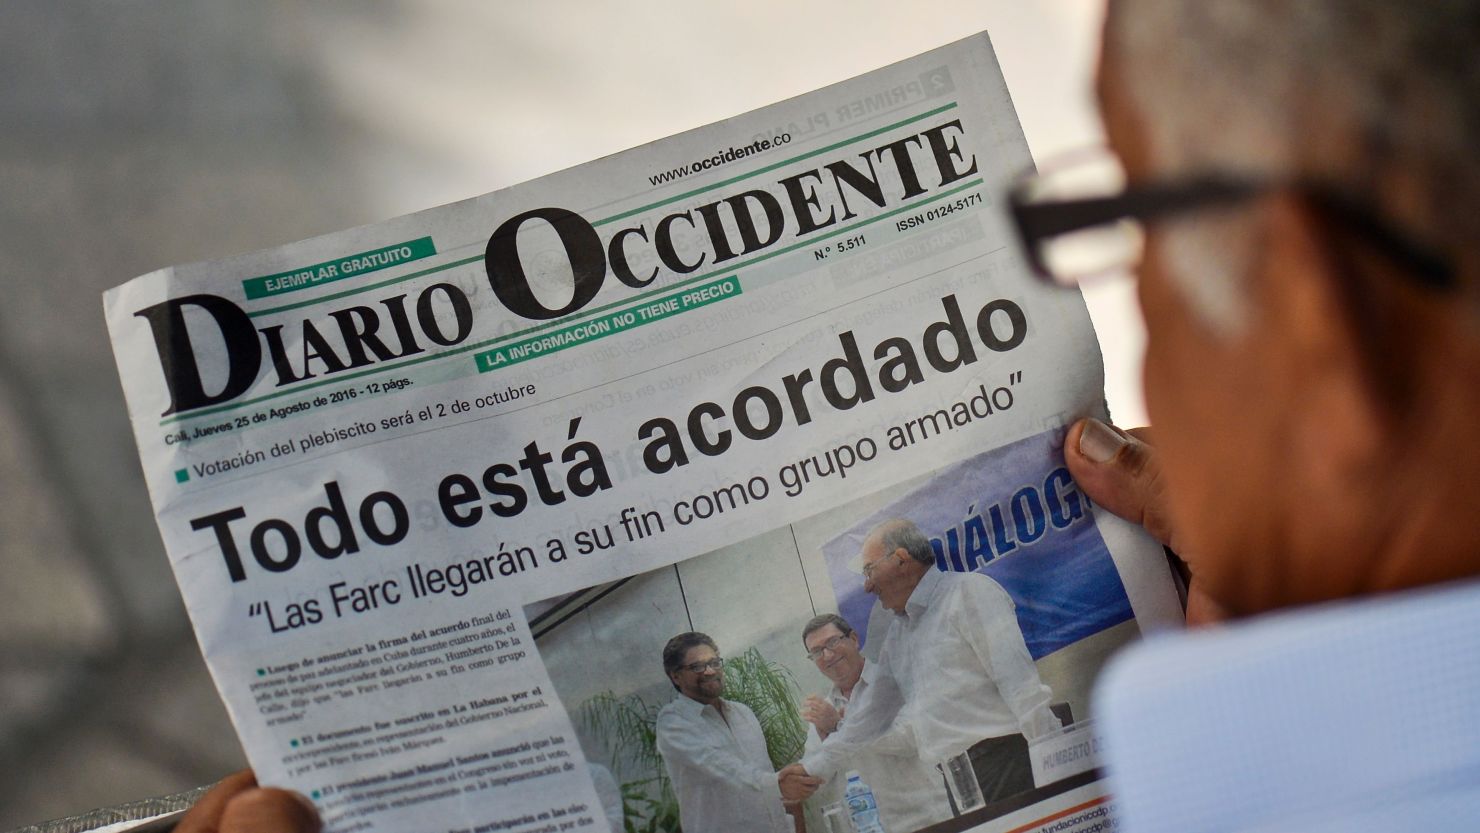 'Everything is agreed' read one newspaper headline after the peace deal was announced. Residents of Bogota are not so sure.